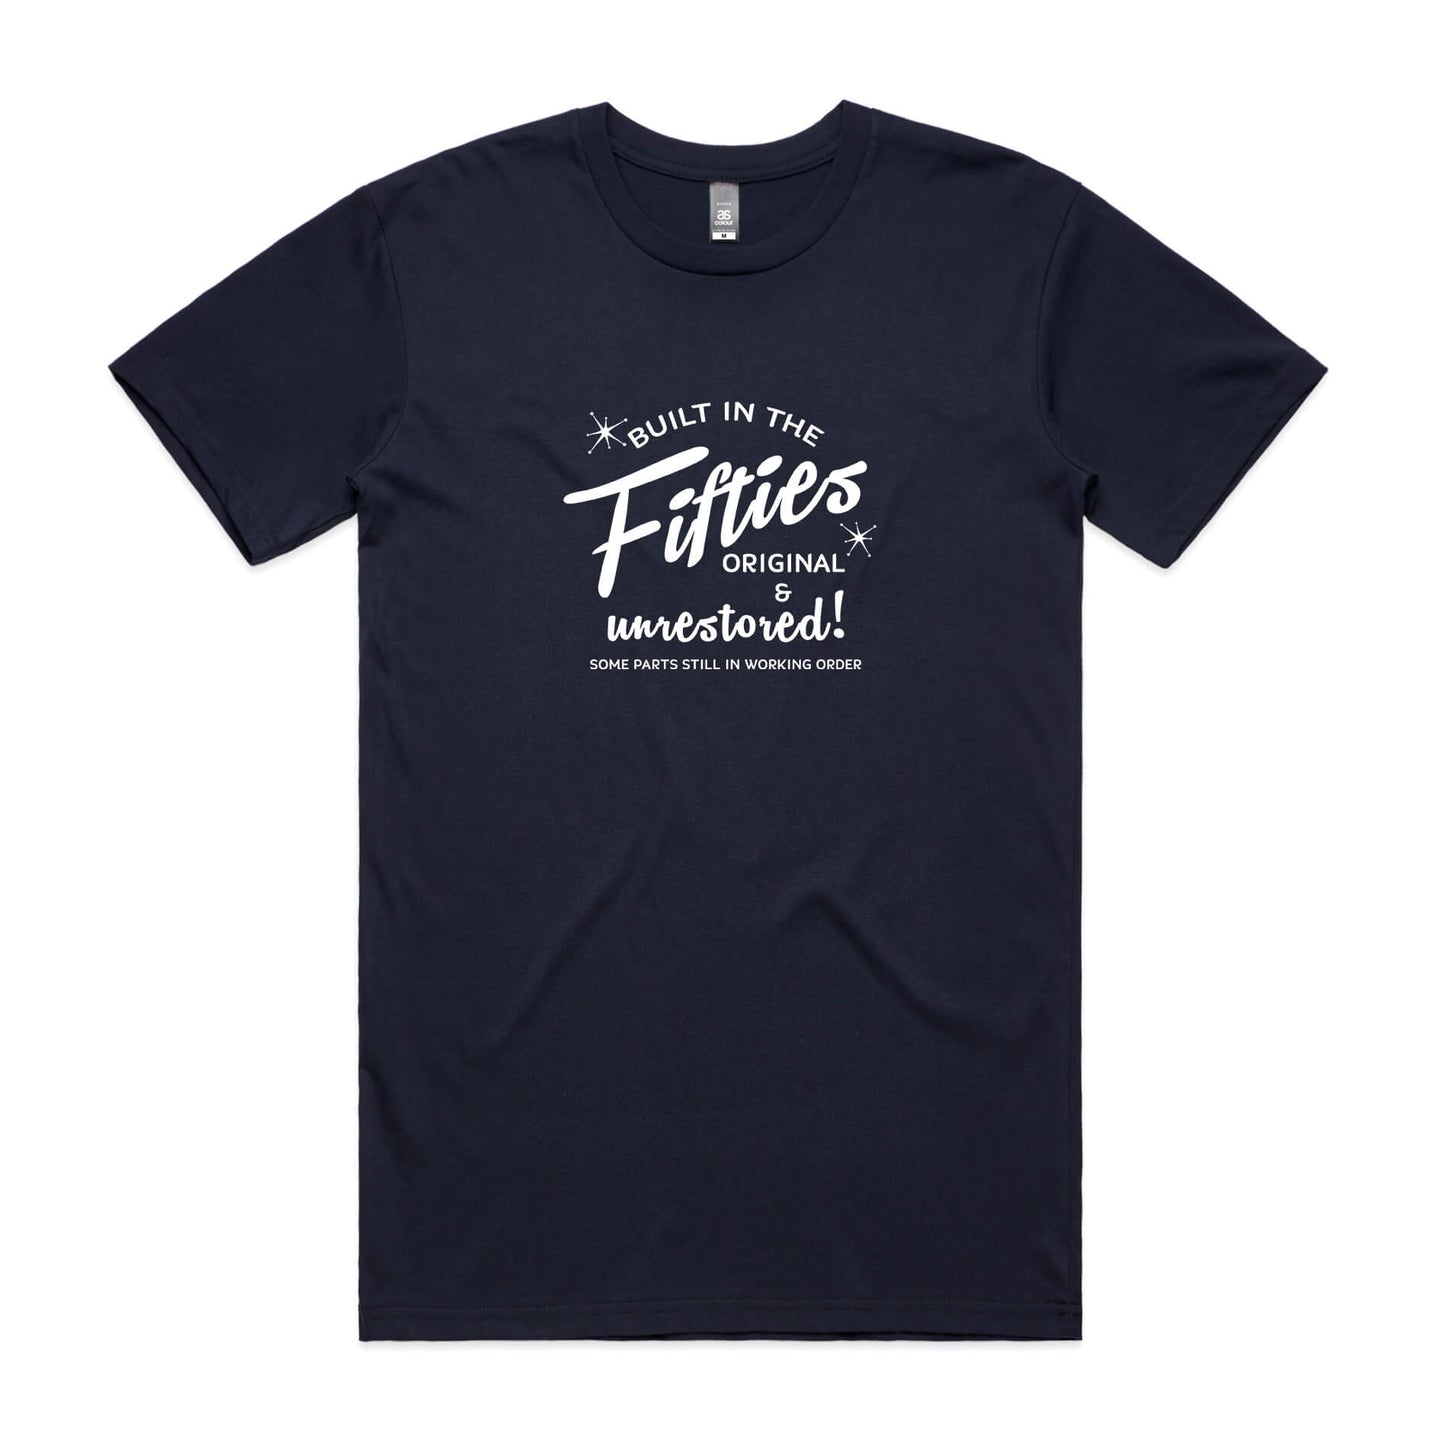 Built in the Fifties t-shirt in navy with white slogan print